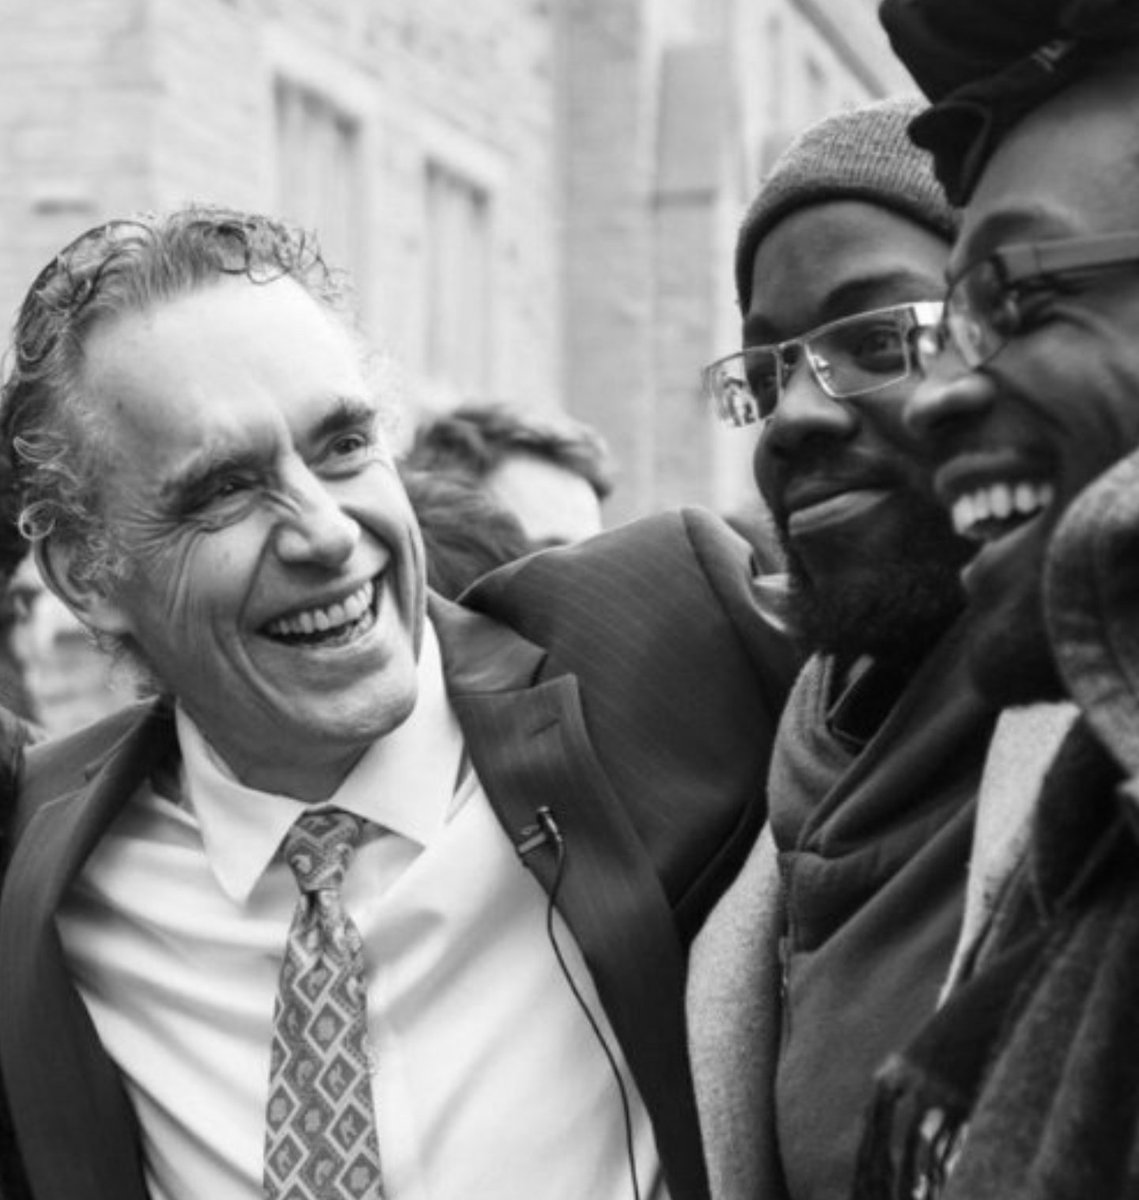 Jordan Peterson Quotes Twitter: ""If we each live properly, we will collectively flourish" https://t.co/jJKNfTUHjK" / Twitter